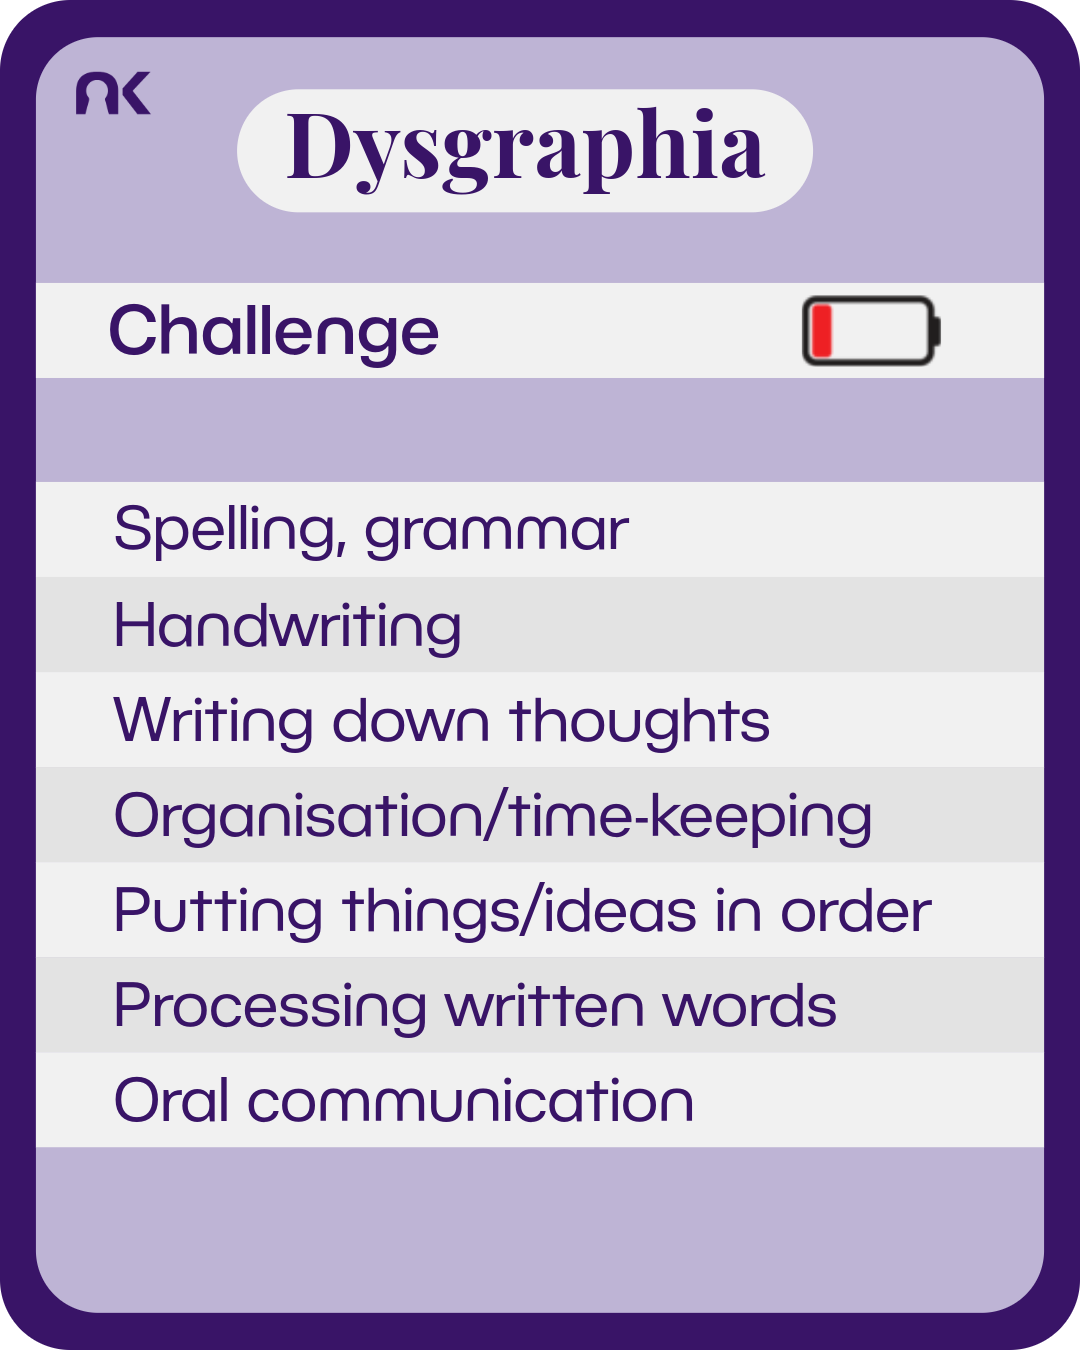 An information card made to look like it is from a card game. Next to the subtitle "challenge" is a battery with red bar to show low charge. Text says: "Dysgraphia. Challenge. Spelling, grammar; Handwriting; Writing down thoughts; Organisation/time-keeping; Putthing things/ideas in order; Processing written words; Oral communication."